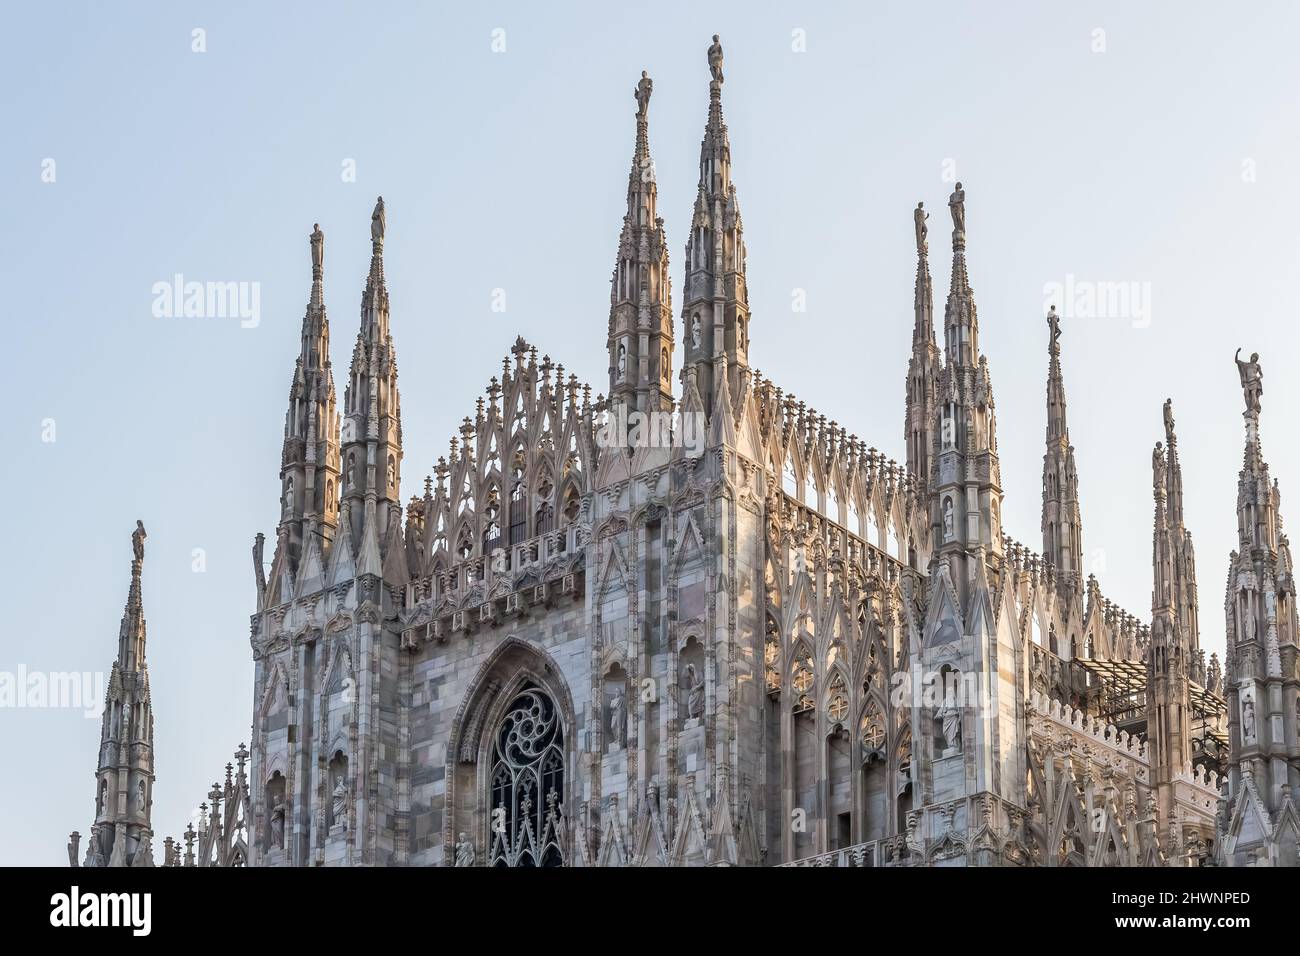 Architectural detail of The Milan Cathedral (Italian, Duomo di Milano), the cathedral church of Milan in Lombardy, Italy Stock Photo